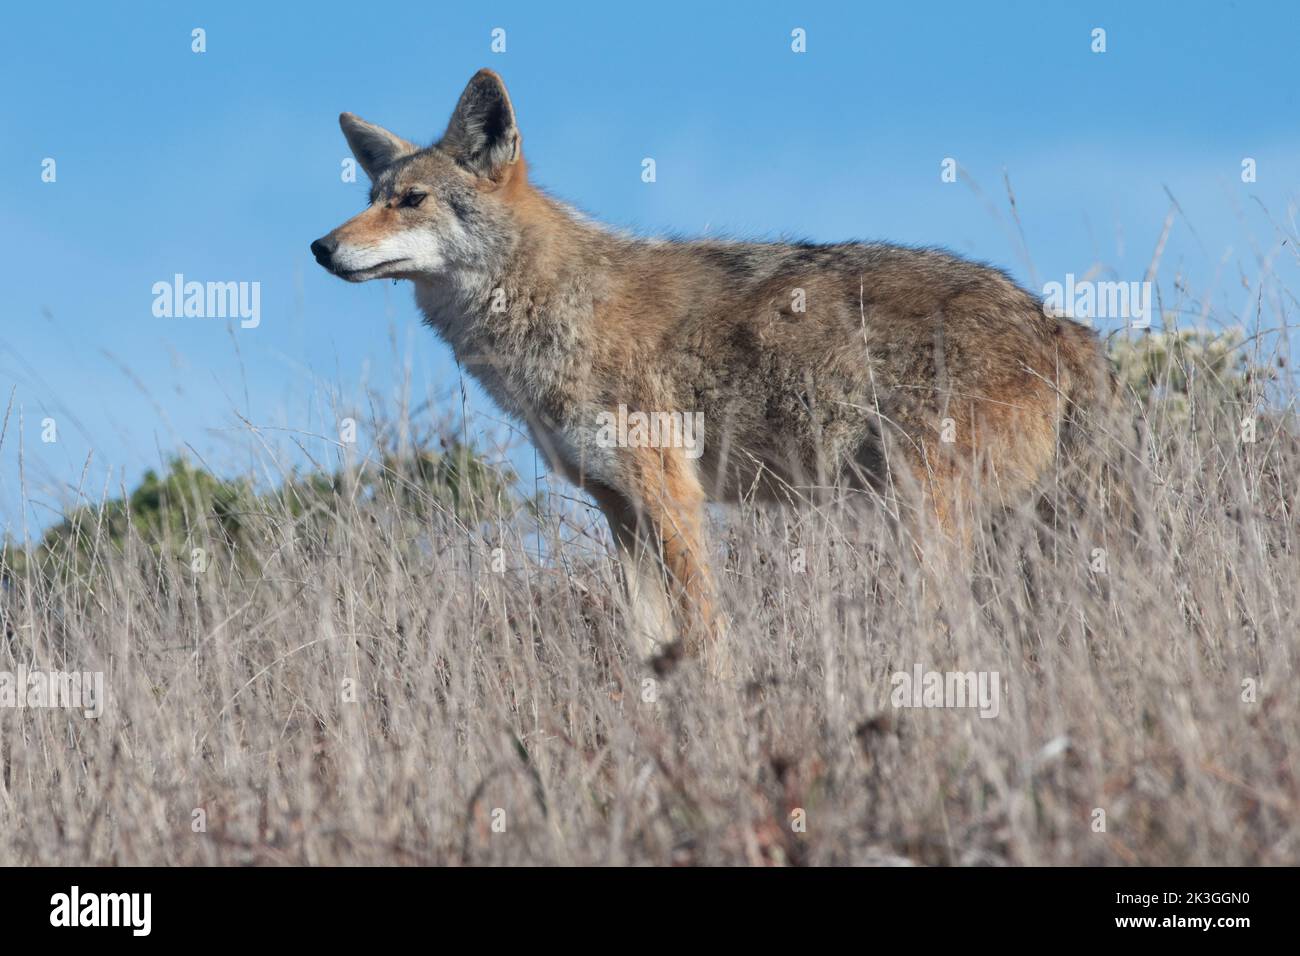 A coyote (Canis latrans) standing in tall grass in Point Reyes National seashore, California. Stock Photo